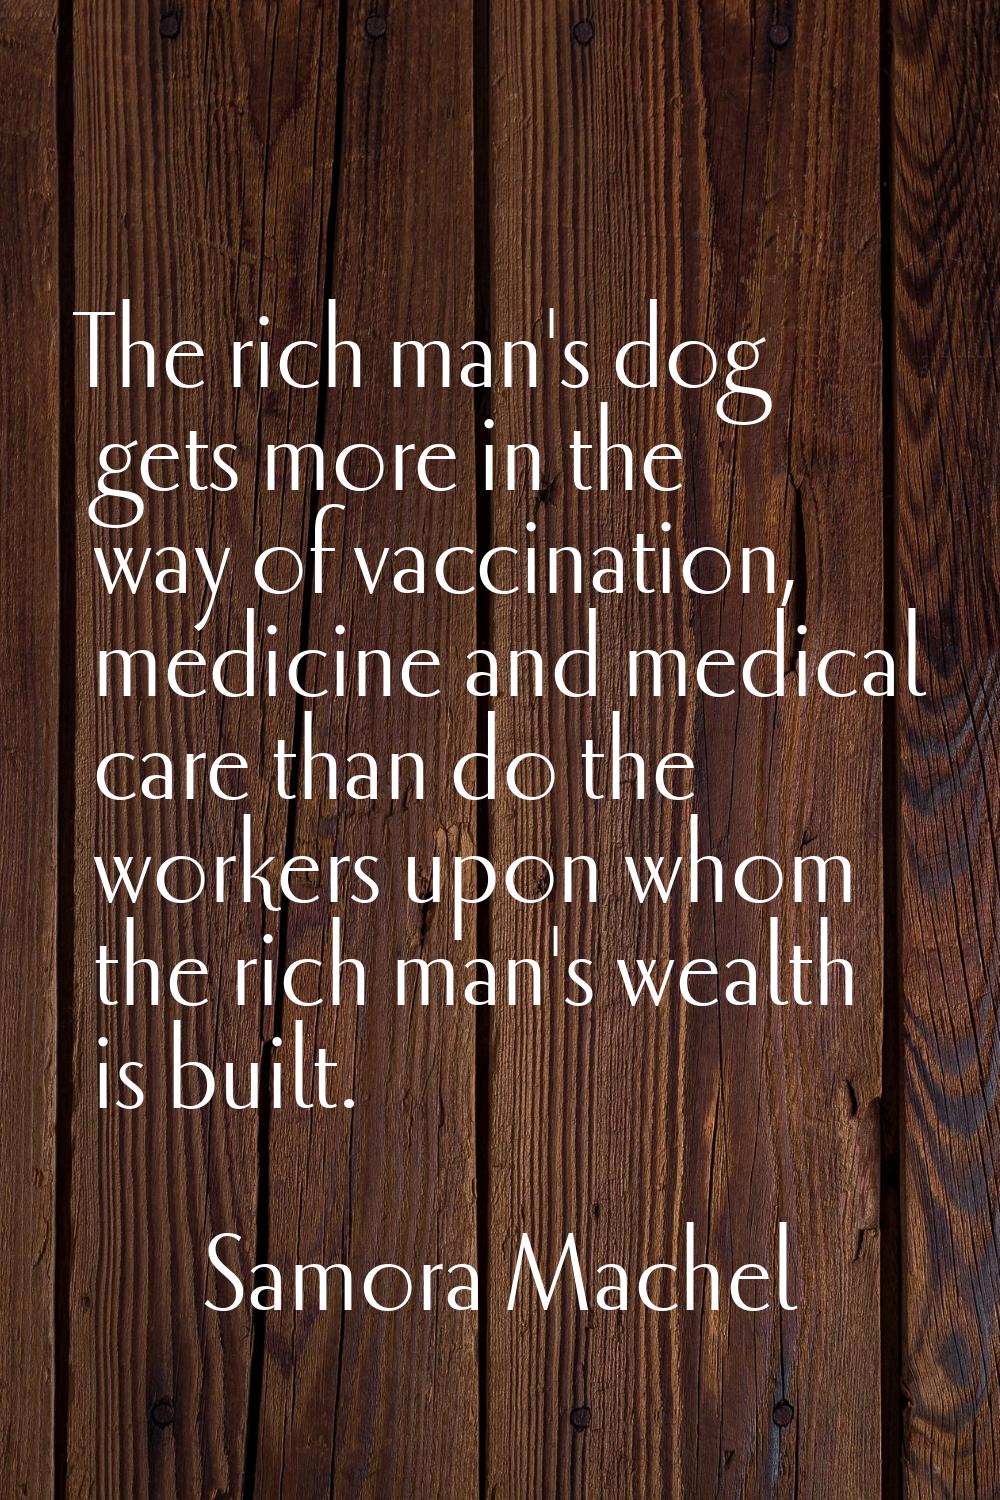 The rich man's dog gets more in the way of vaccination, medicine and medical care than do the worke